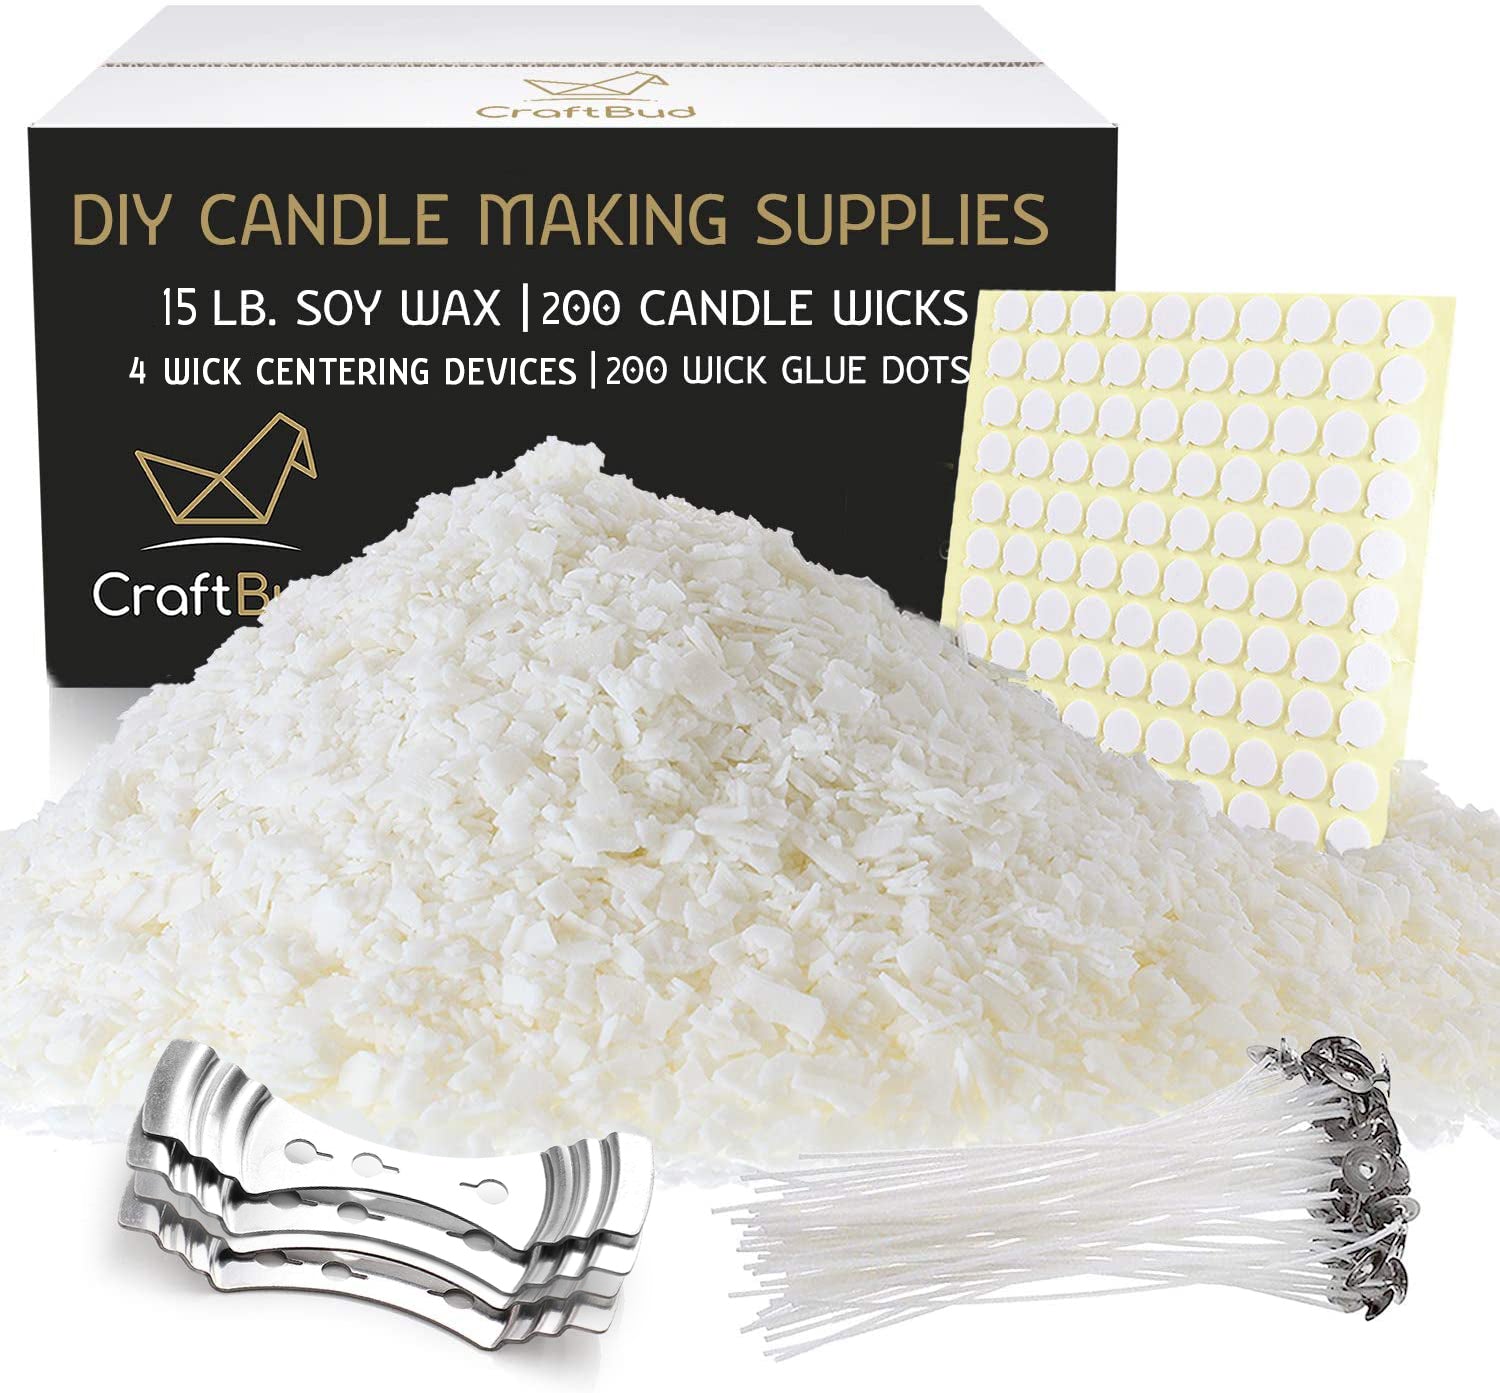 Candle making kit • Compare & find best prices today »